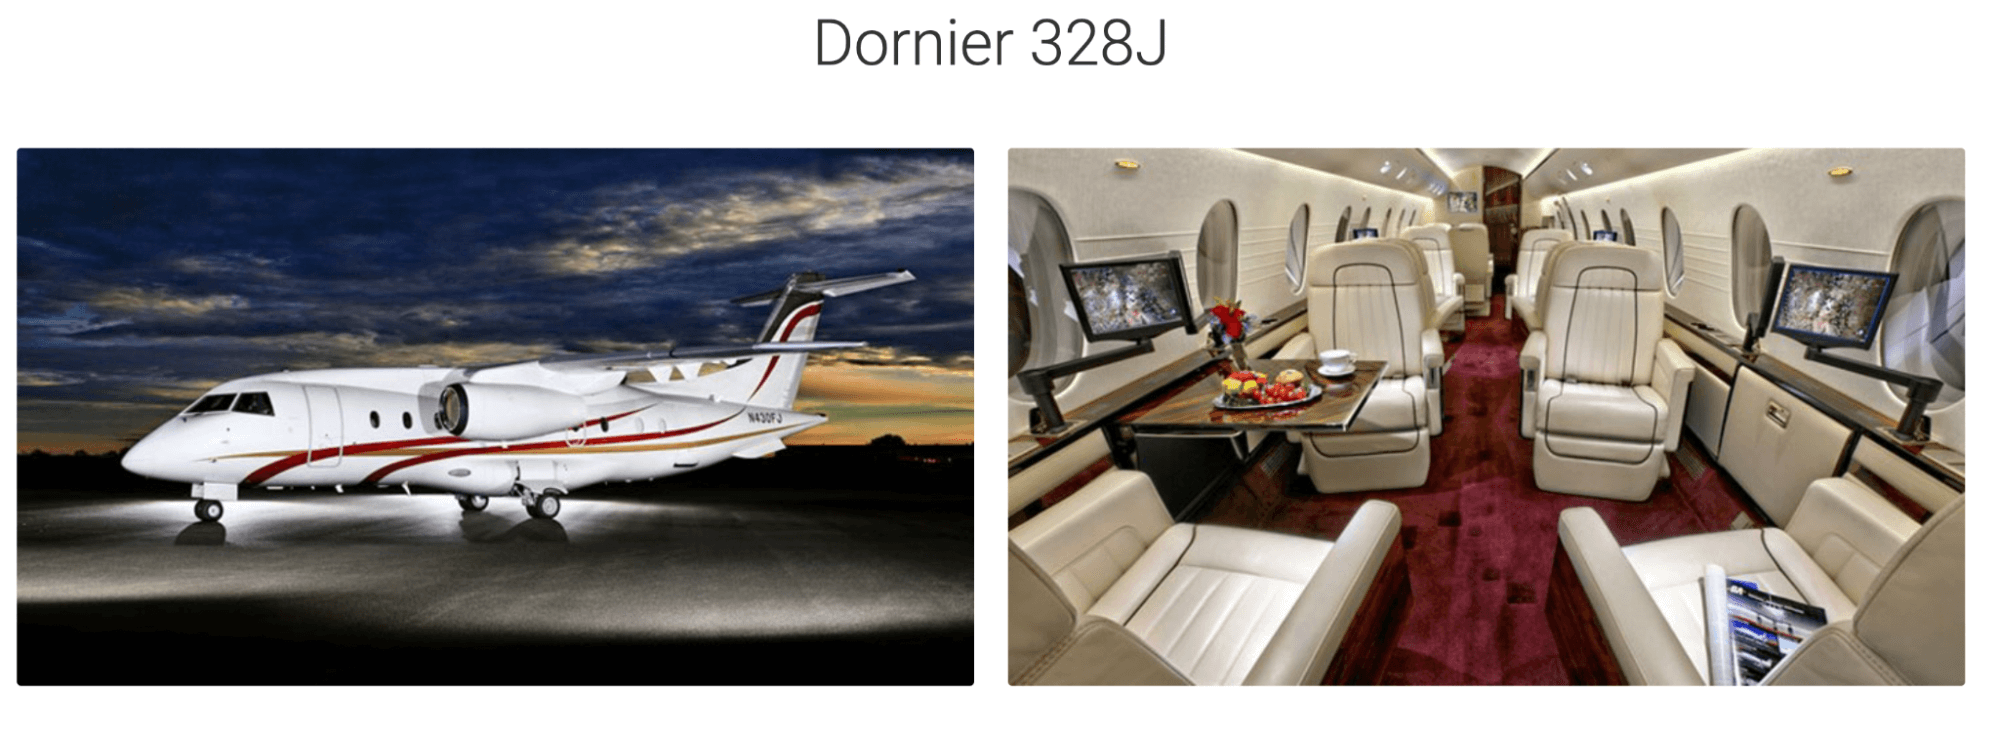 An exterior and interior picture of the business jet Dornier 328J.